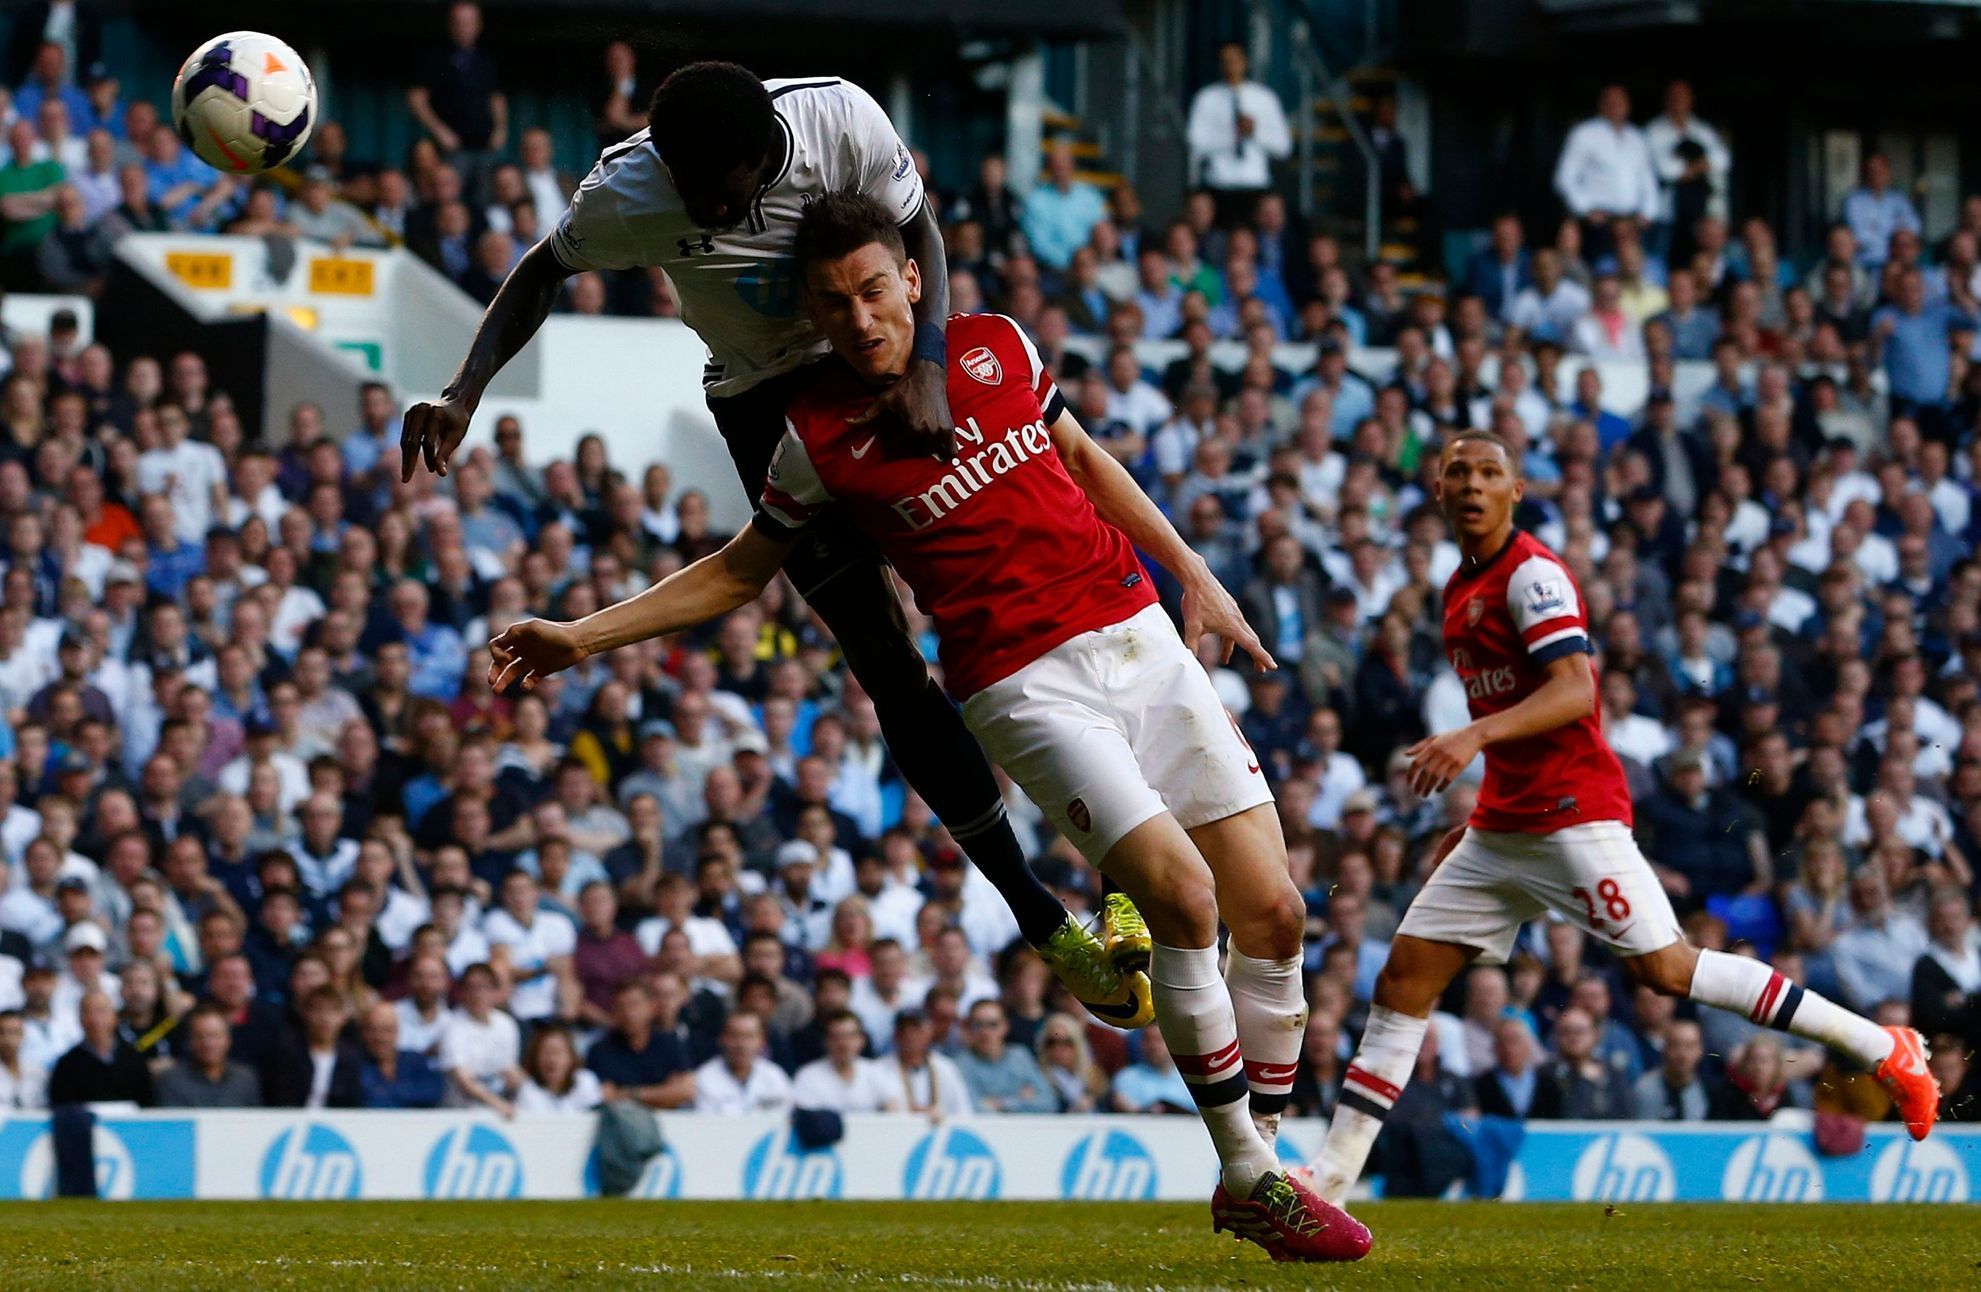 Tottenham Hotspur's Adebayor gets above Arsenal's Koscielny to head at goal during their English Premier League soccer match in London